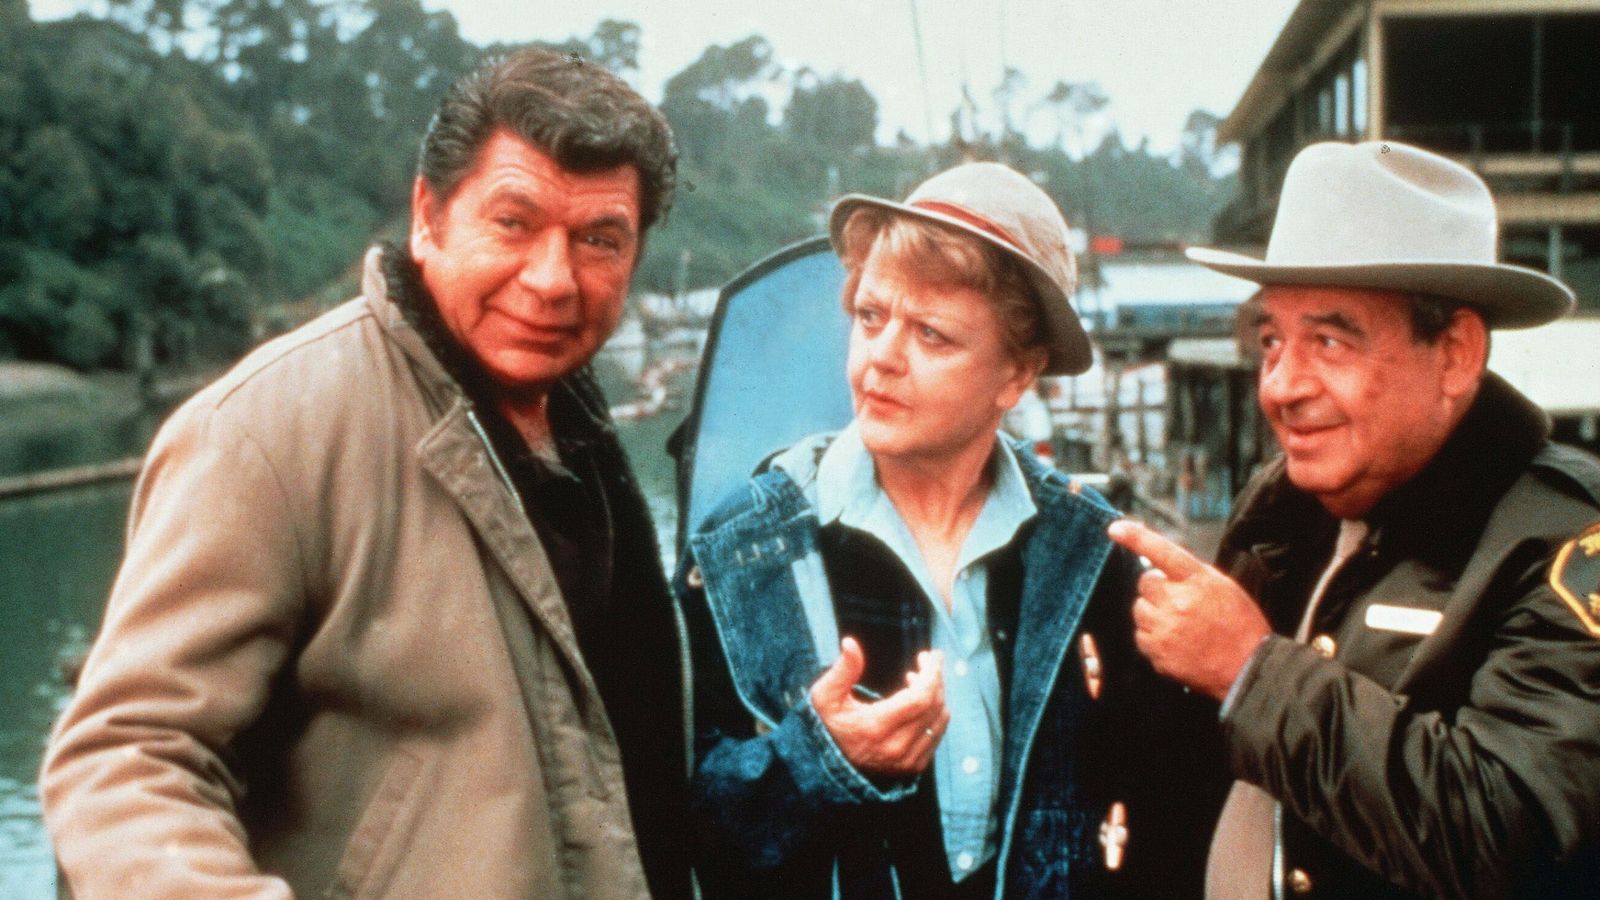 Angela Lansbury: Murder, She Wrote actress dies aged 96